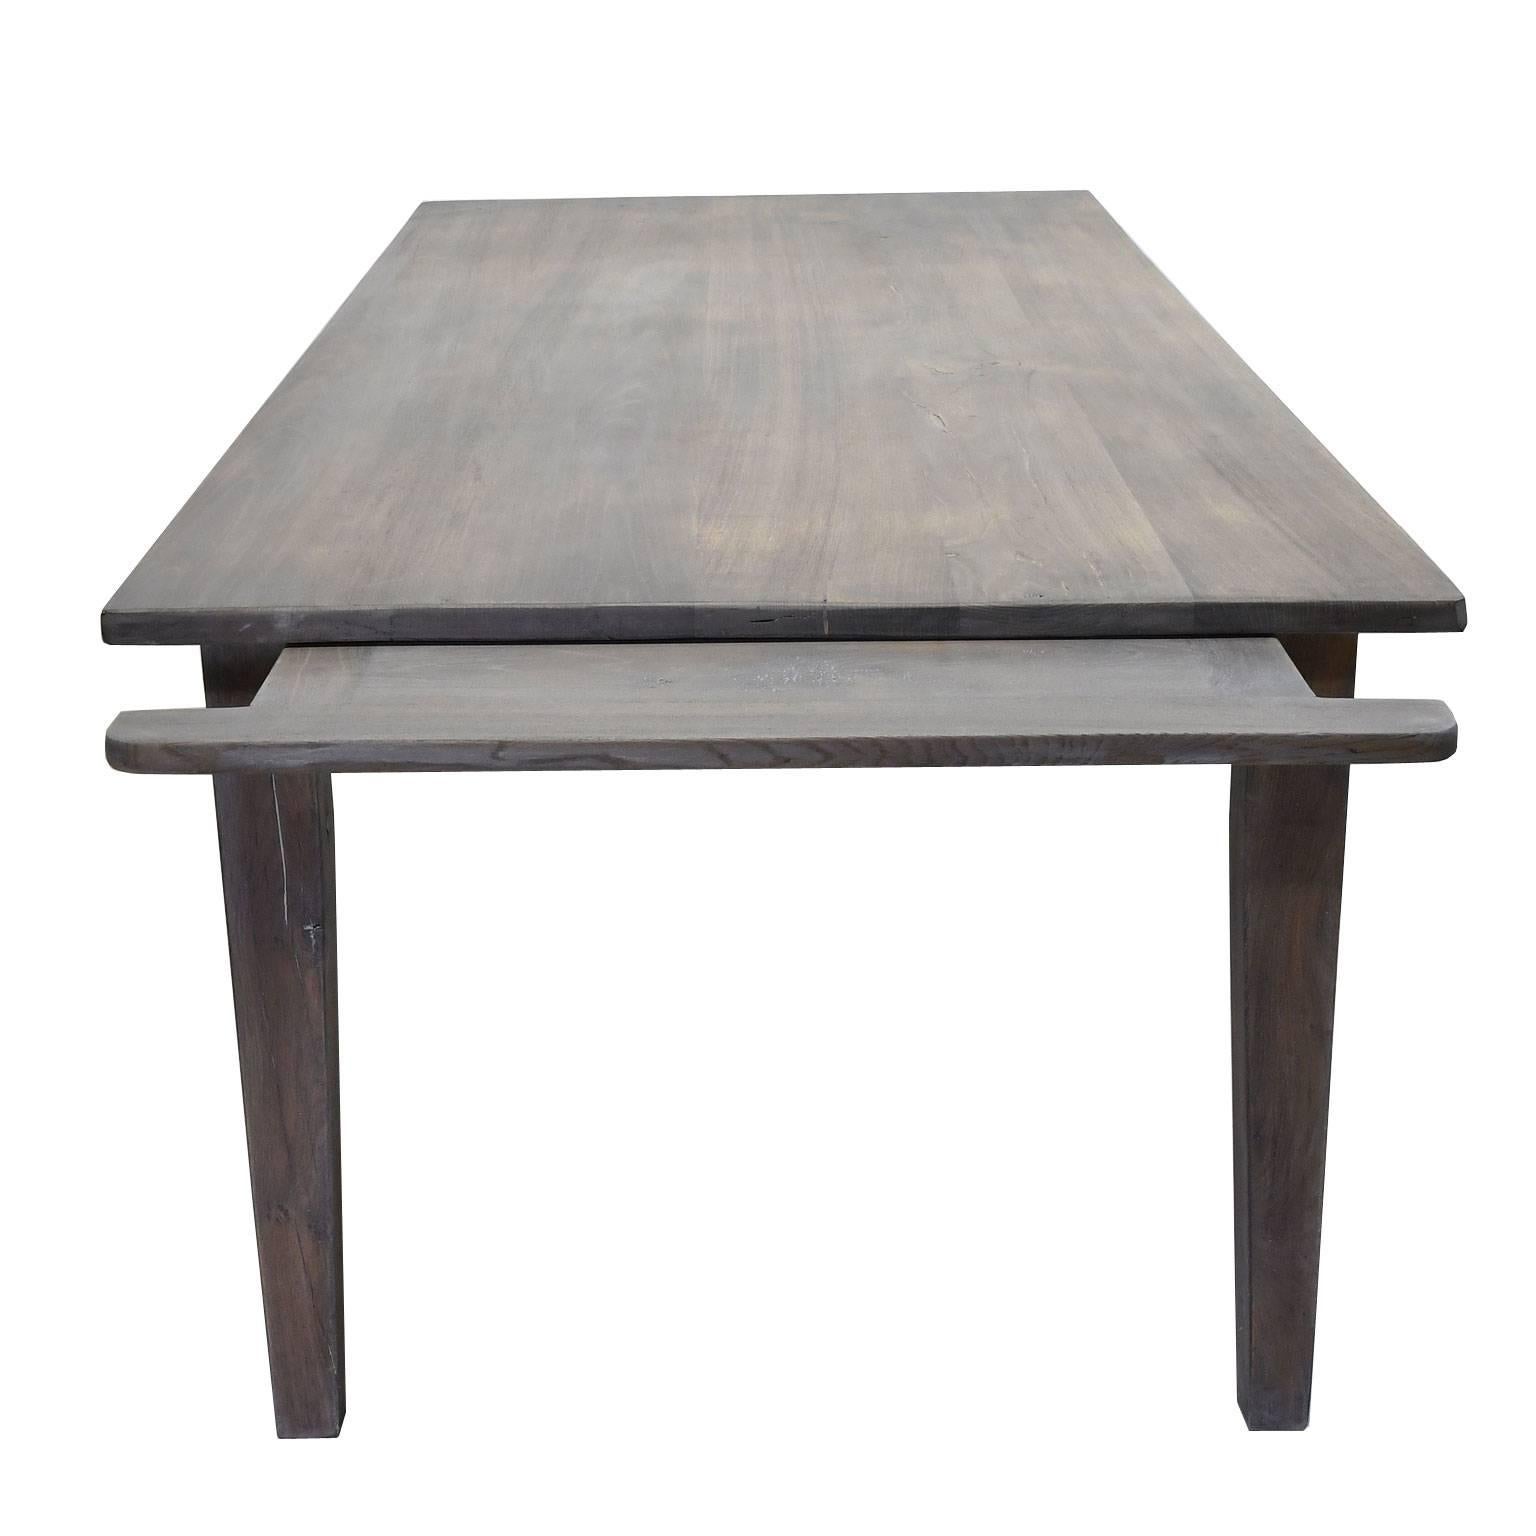 Reclaimed Wood Farmhouse Dining or Kitchen Table in Re-Purposed Oak with Fumed-Taupe Finish